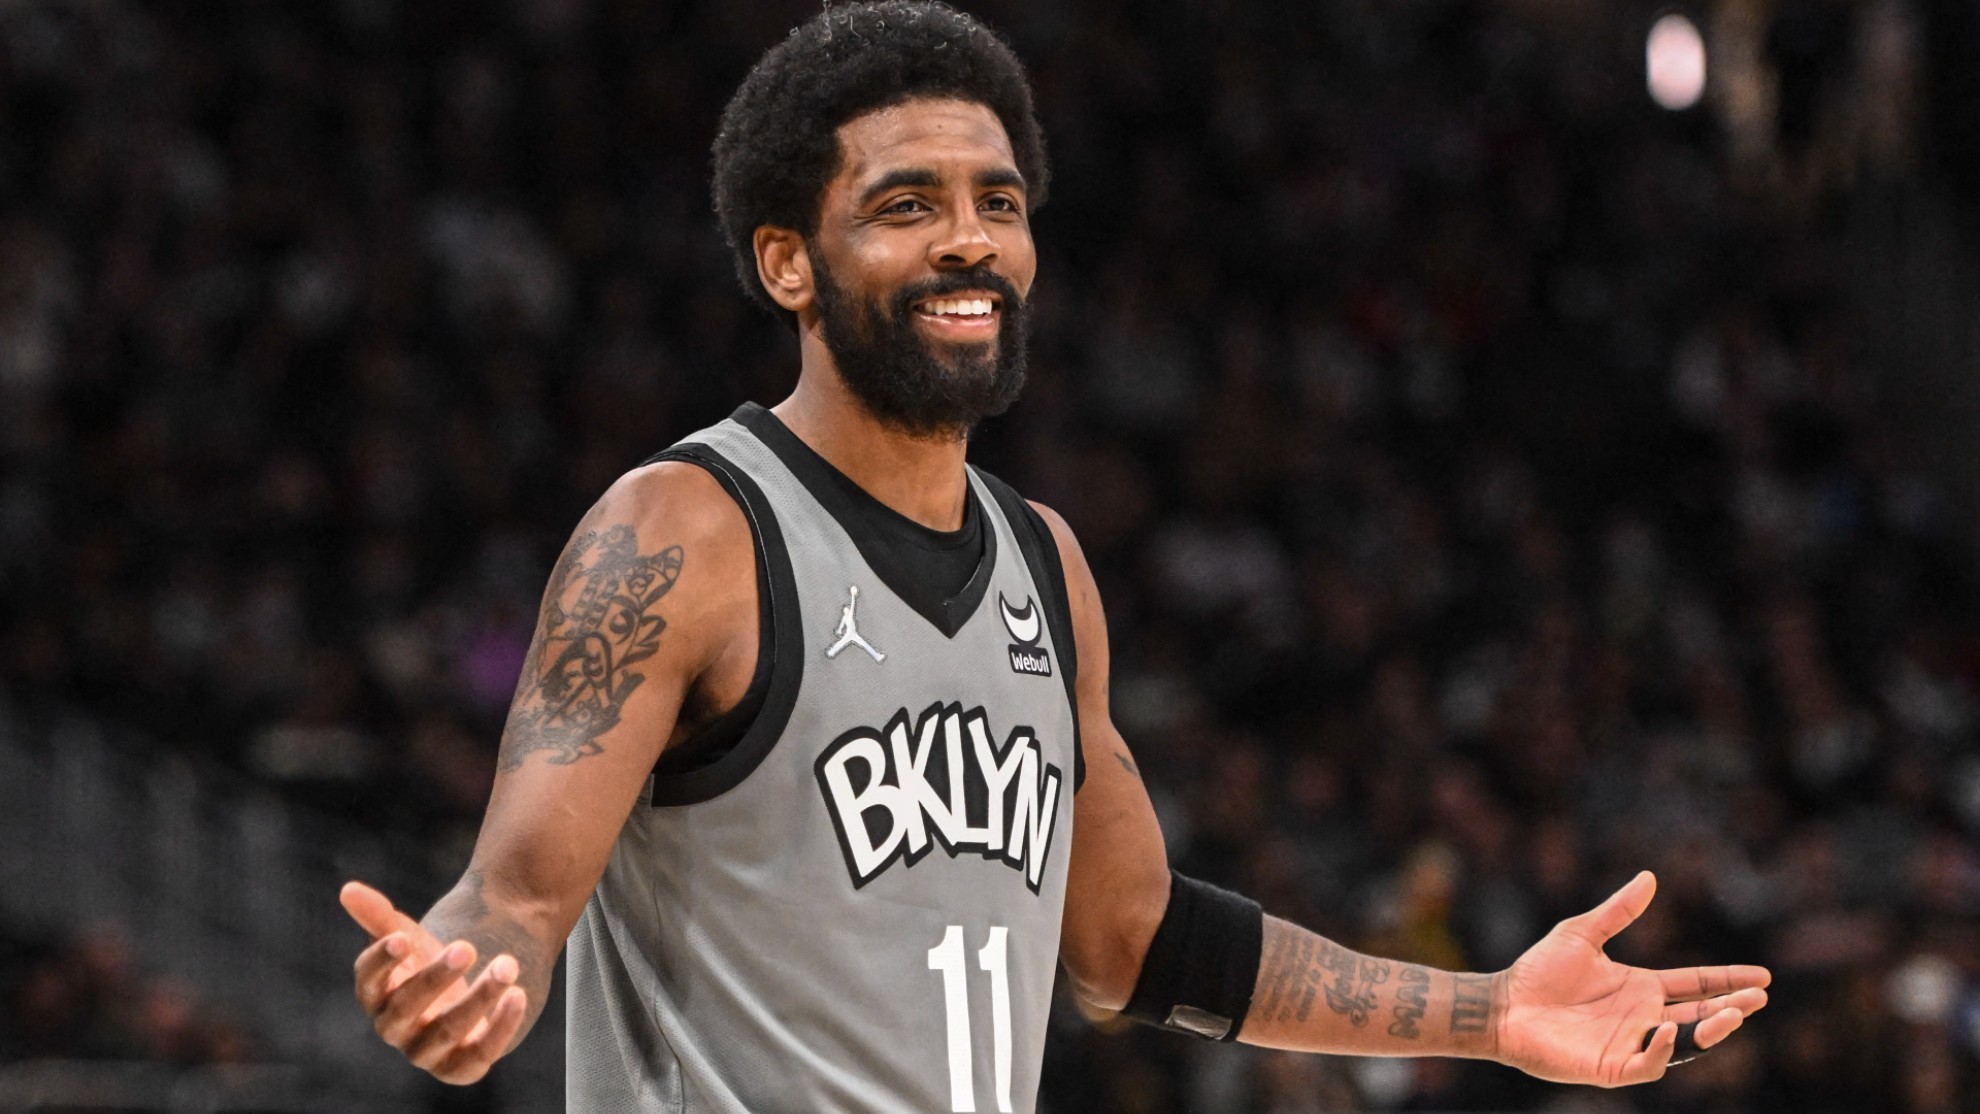 New York ends the vaccination mandate and will allow Kyrie Irving, the Yankees and Mets to play in the city